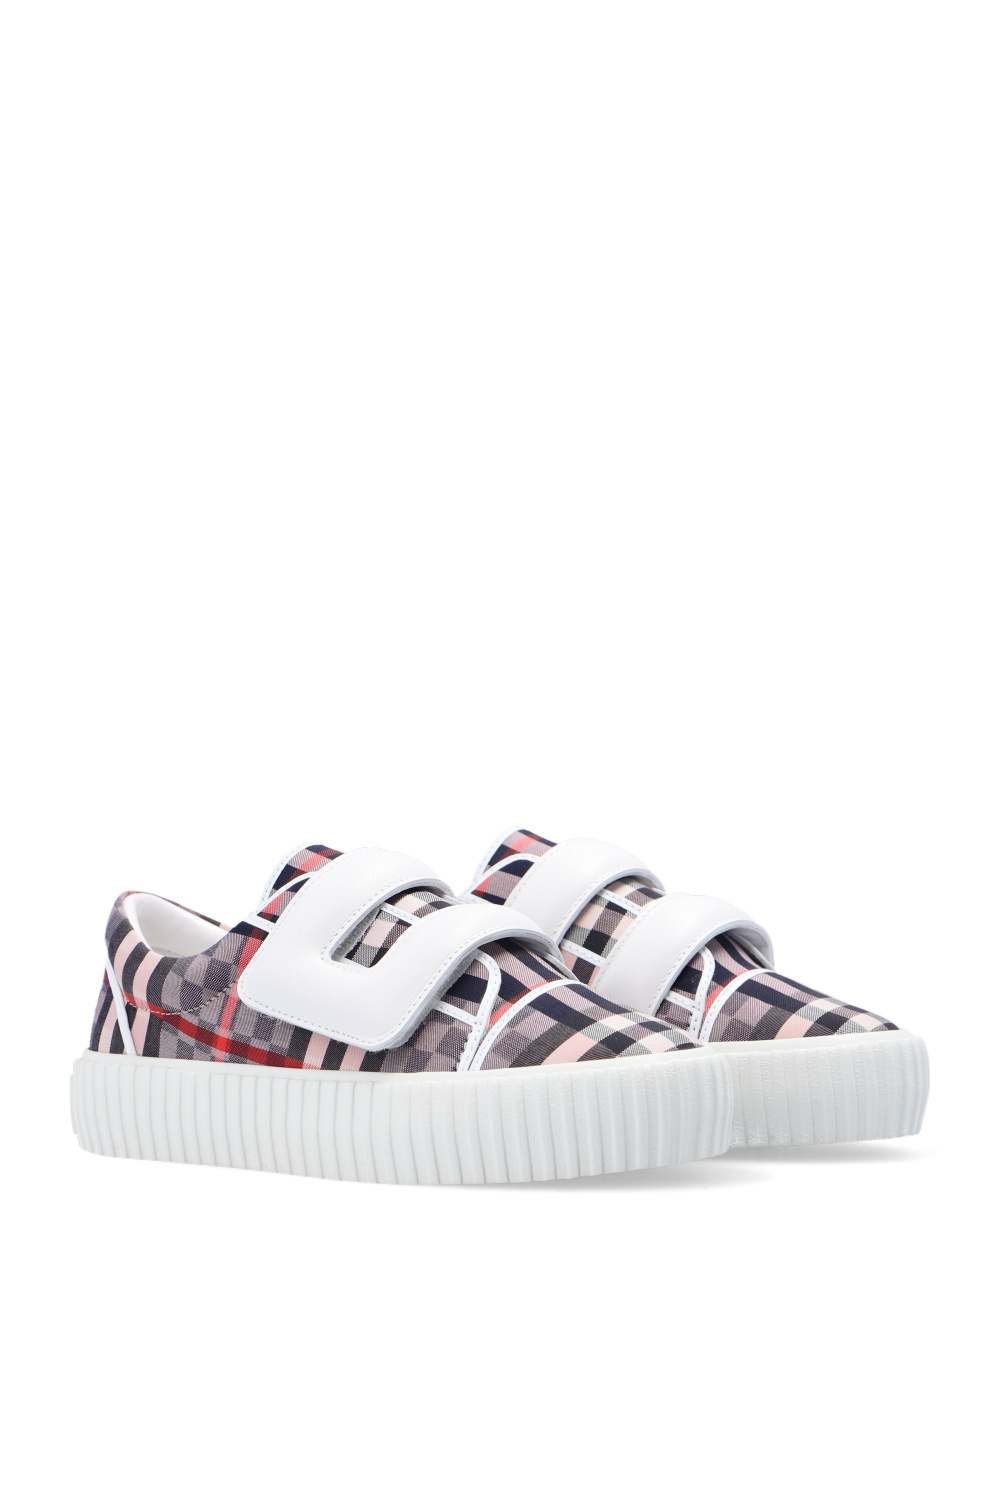 burberry archive Kids Checked sneakers